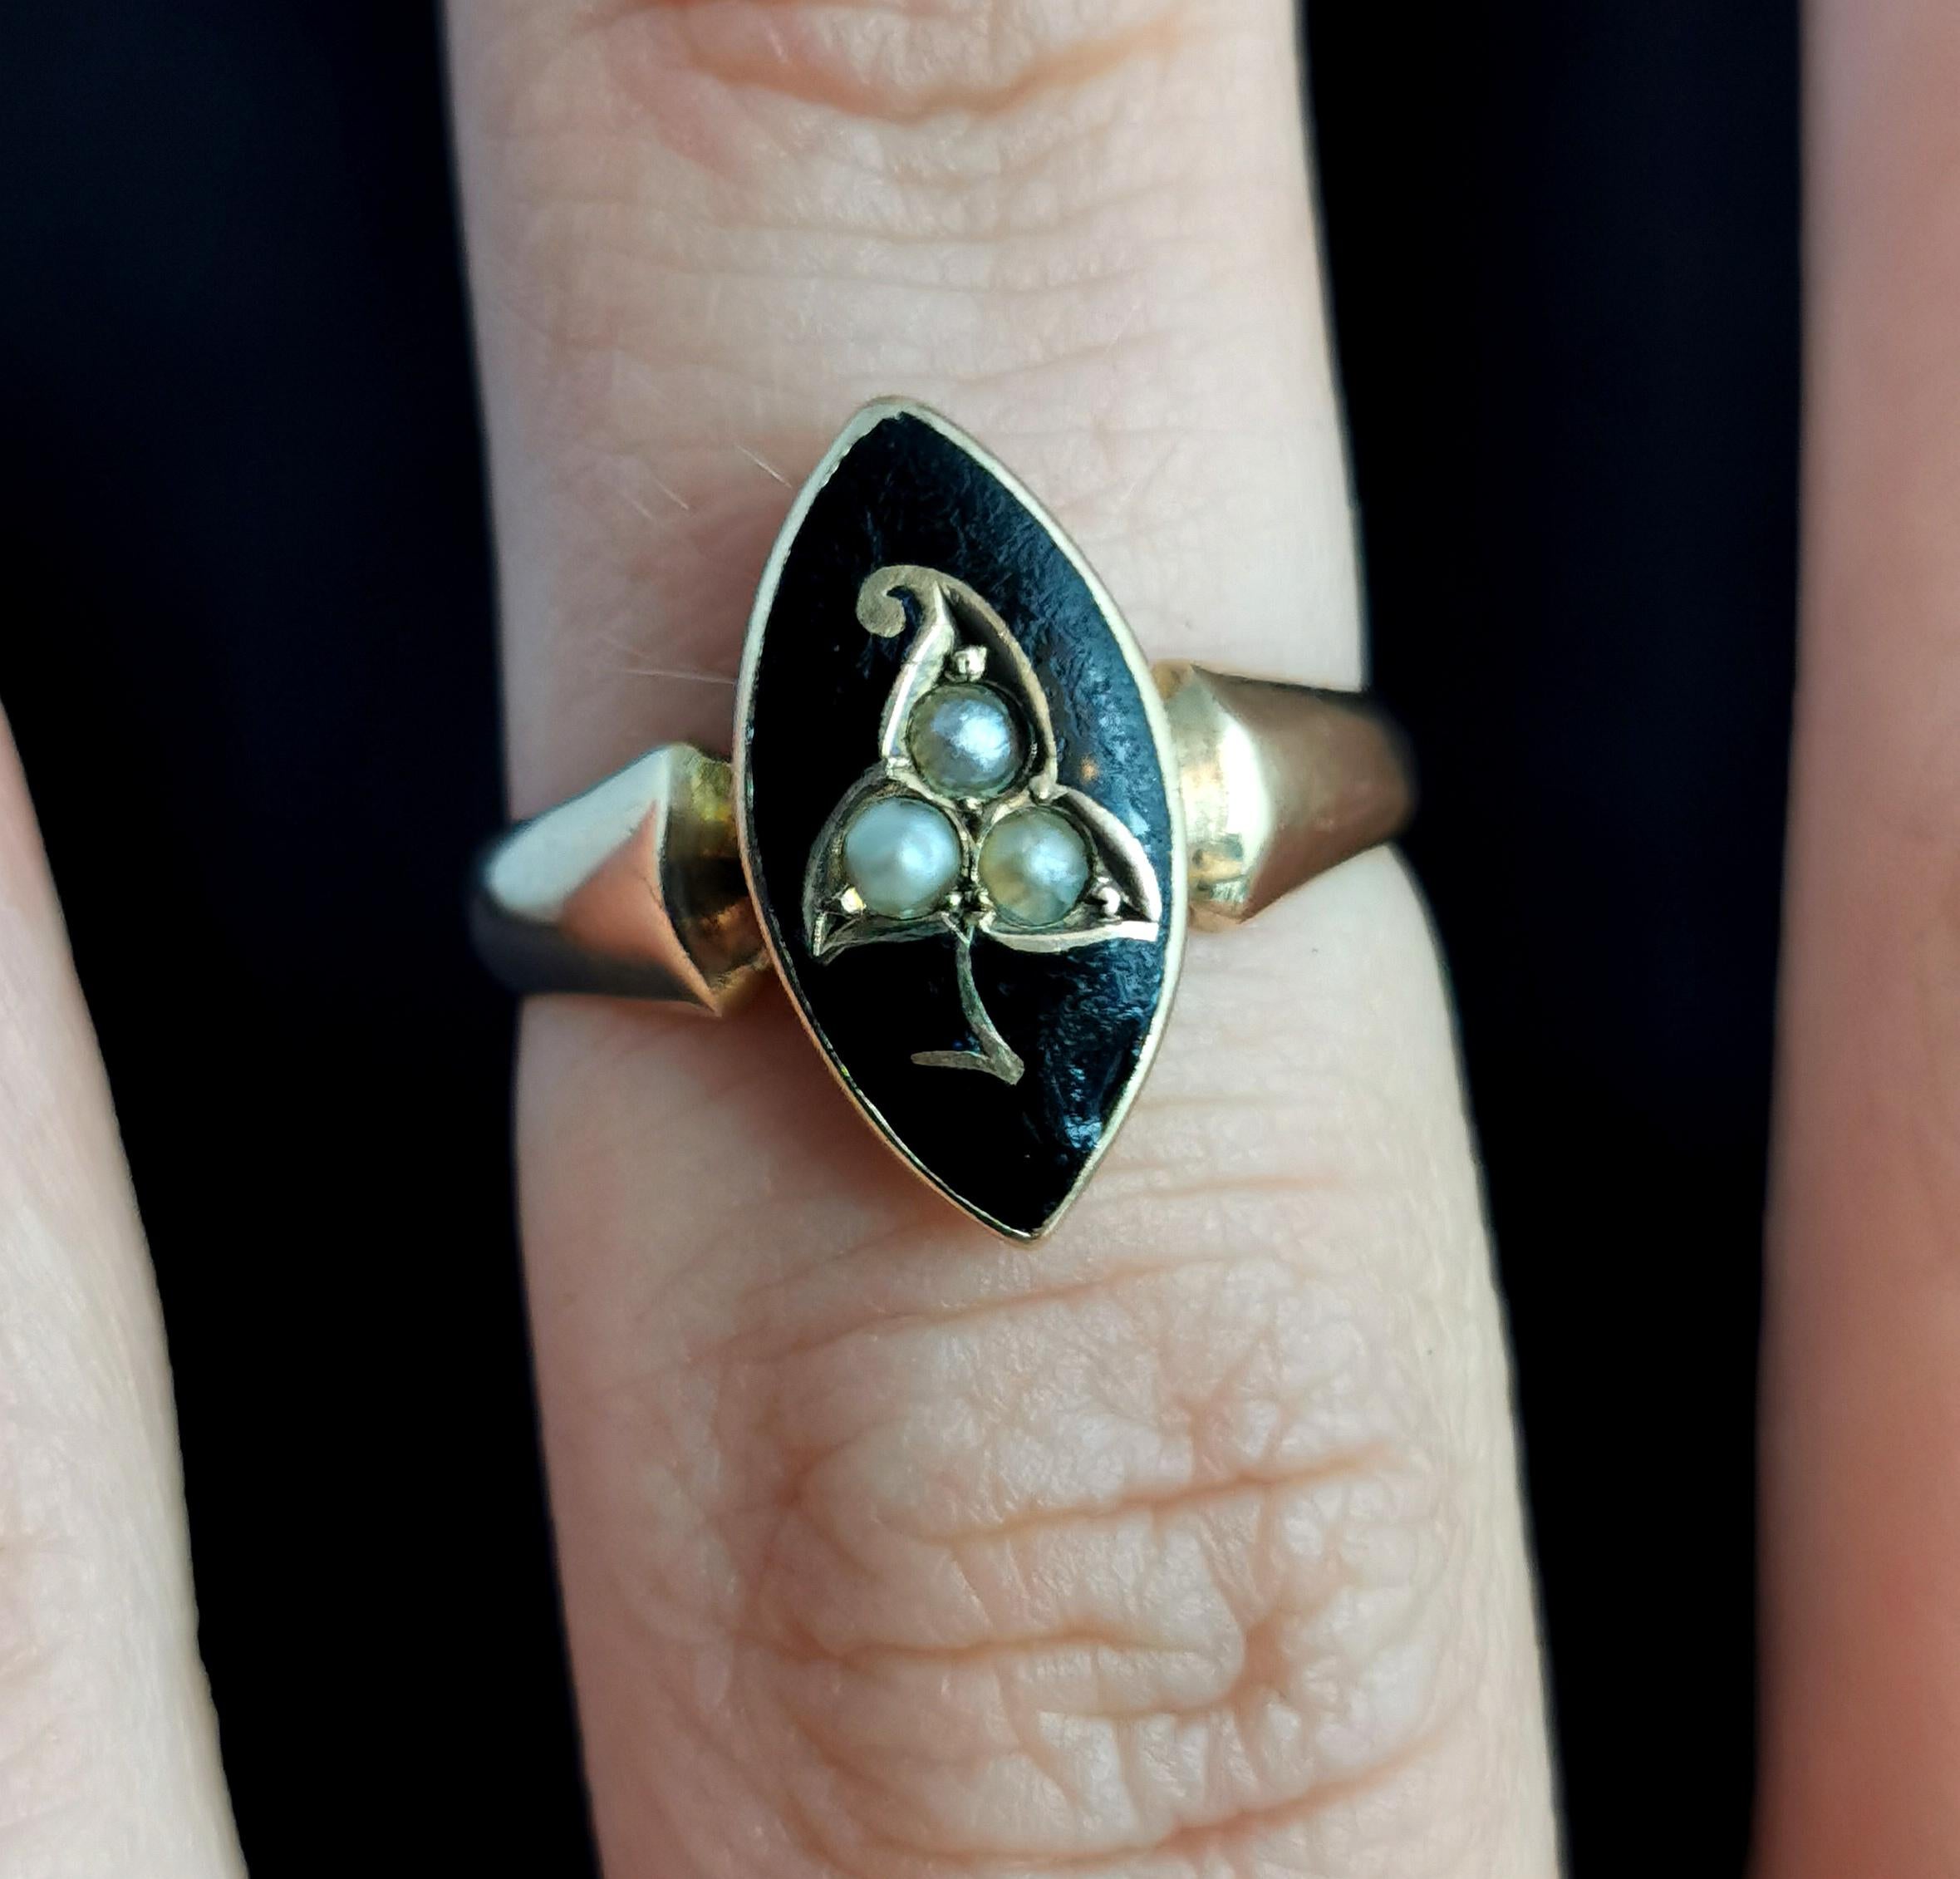 Women's or Men's Antique Navette Mourning Ring, Black Enamel and Pearl, Ivy Leaf, 9k Yellow Gold